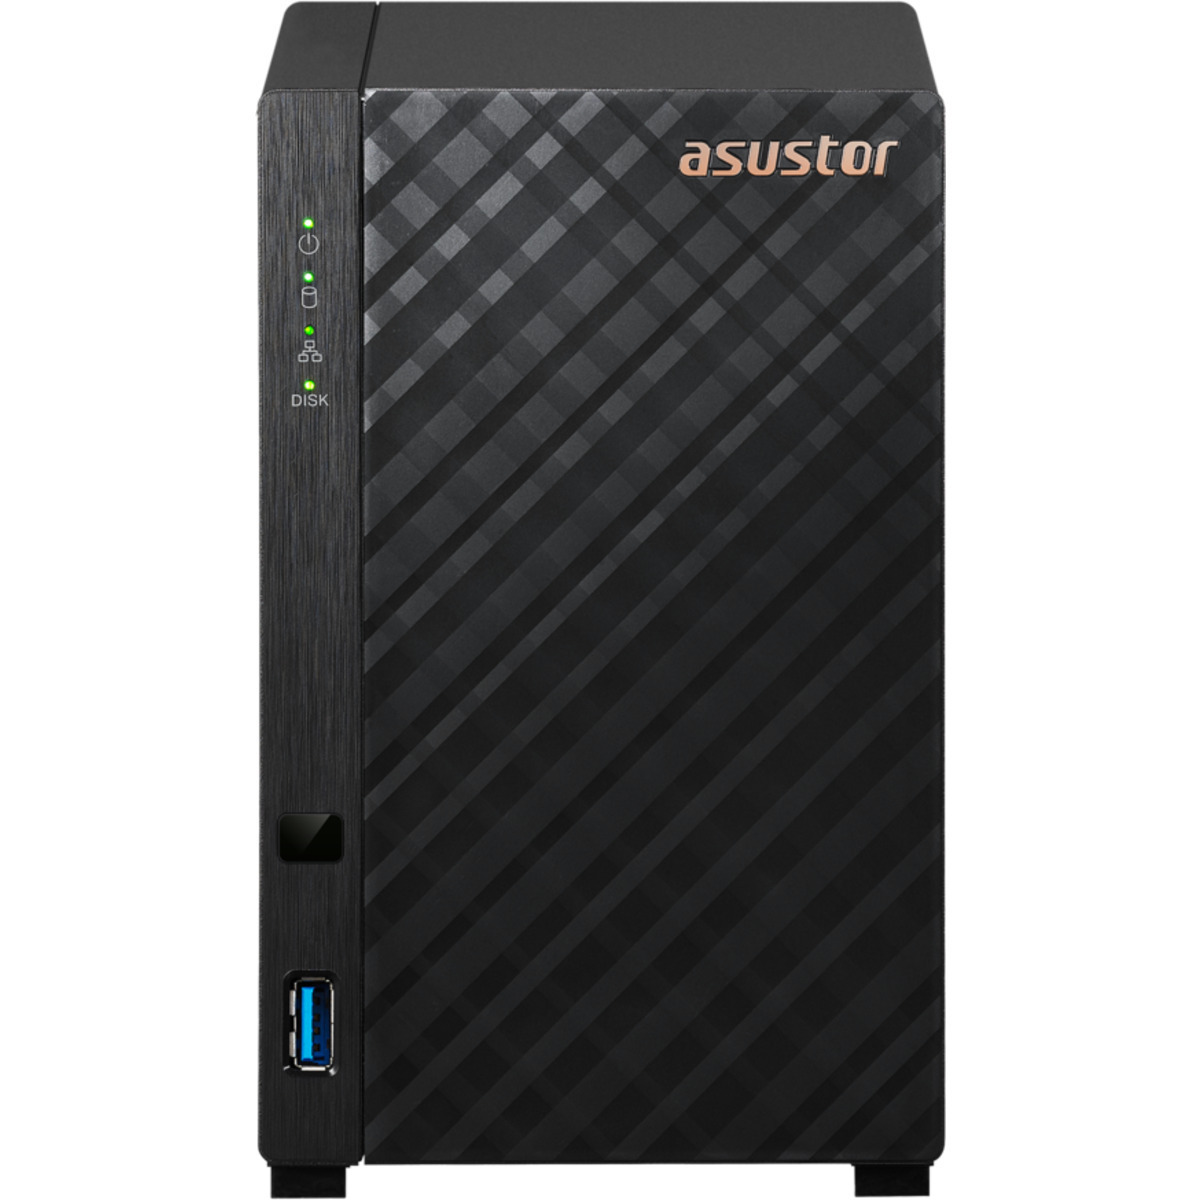 ASUSTOR DRIVESTOR 2 Lite AS1102TL 12tb 2-Bay Desktop Personal / Basic Home / Small Office NAS - Network Attached Storage Device 2x6tb Western Digital Red Plus WD60EFPX 3.5 5640rpm SATA 6Gb/s HDD NAS Class Drives Installed - Burn-In Tested DRIVESTOR 2 Lite AS1102TL